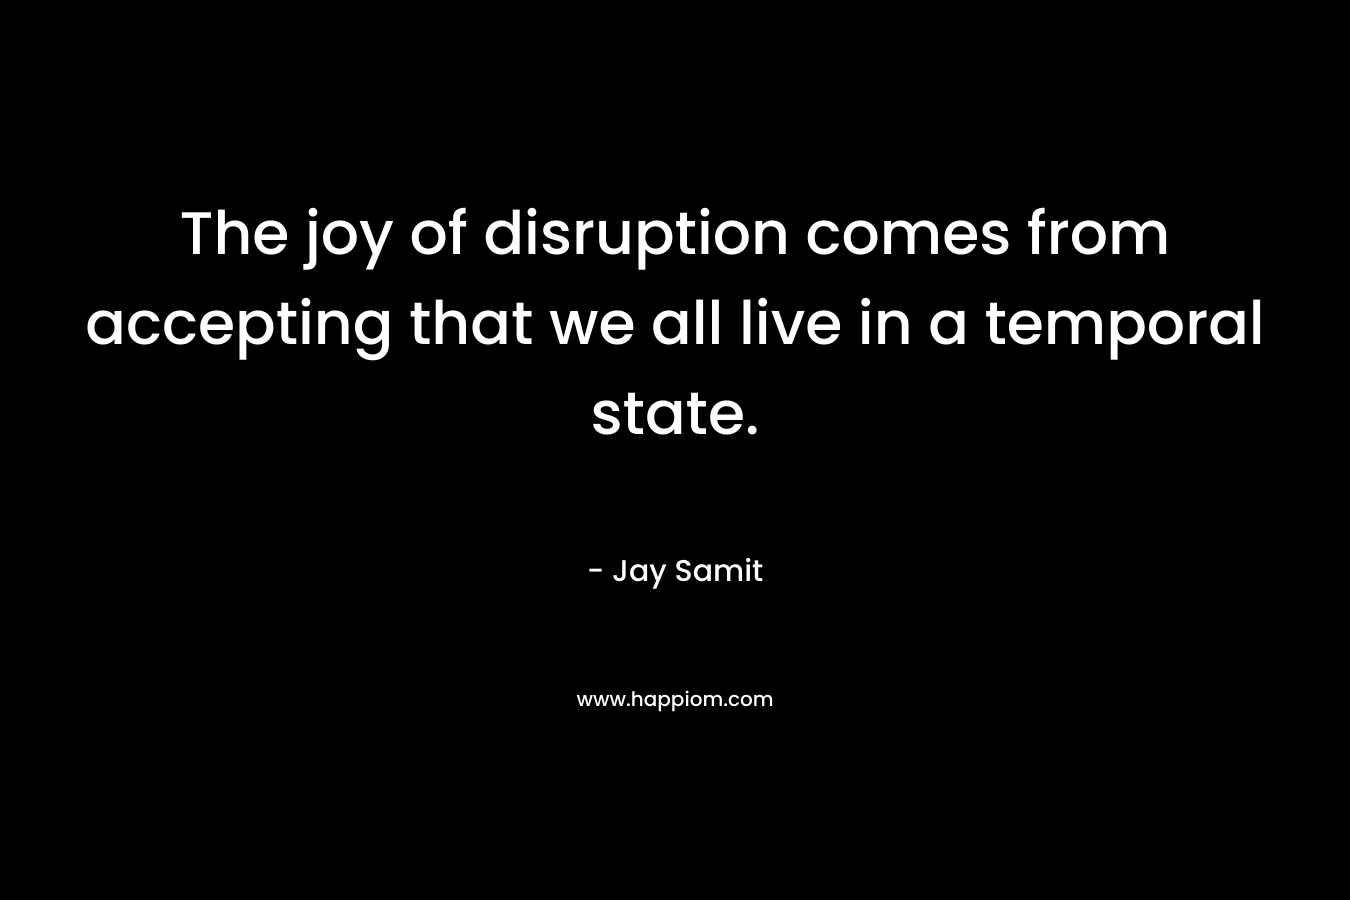 The joy of disruption comes from accepting that we all live in a temporal state.